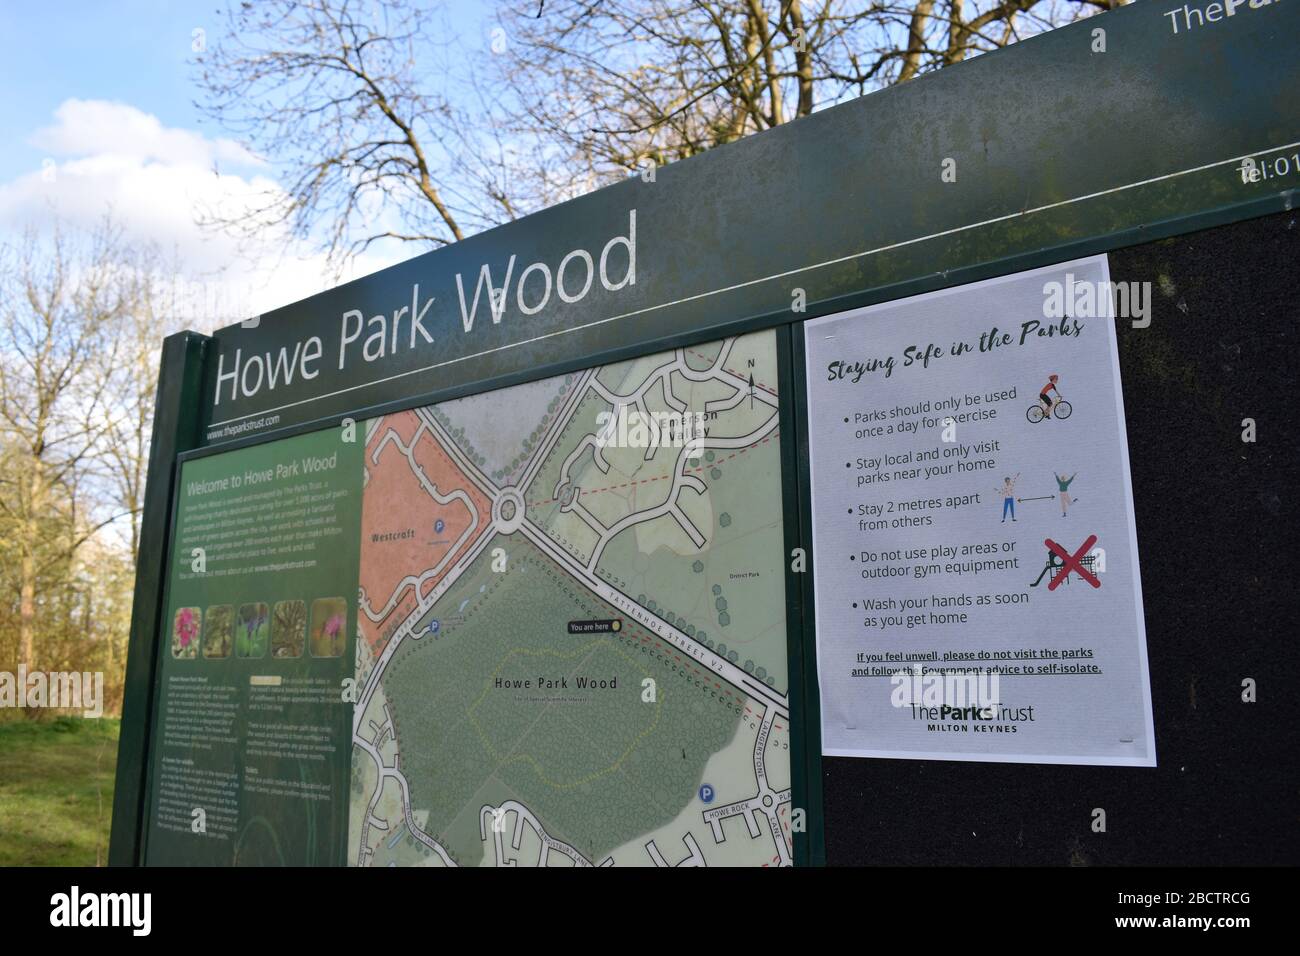 Staying safe in the Parks - notice at Howe Park Wood in Milton Keynes. Stock Photo